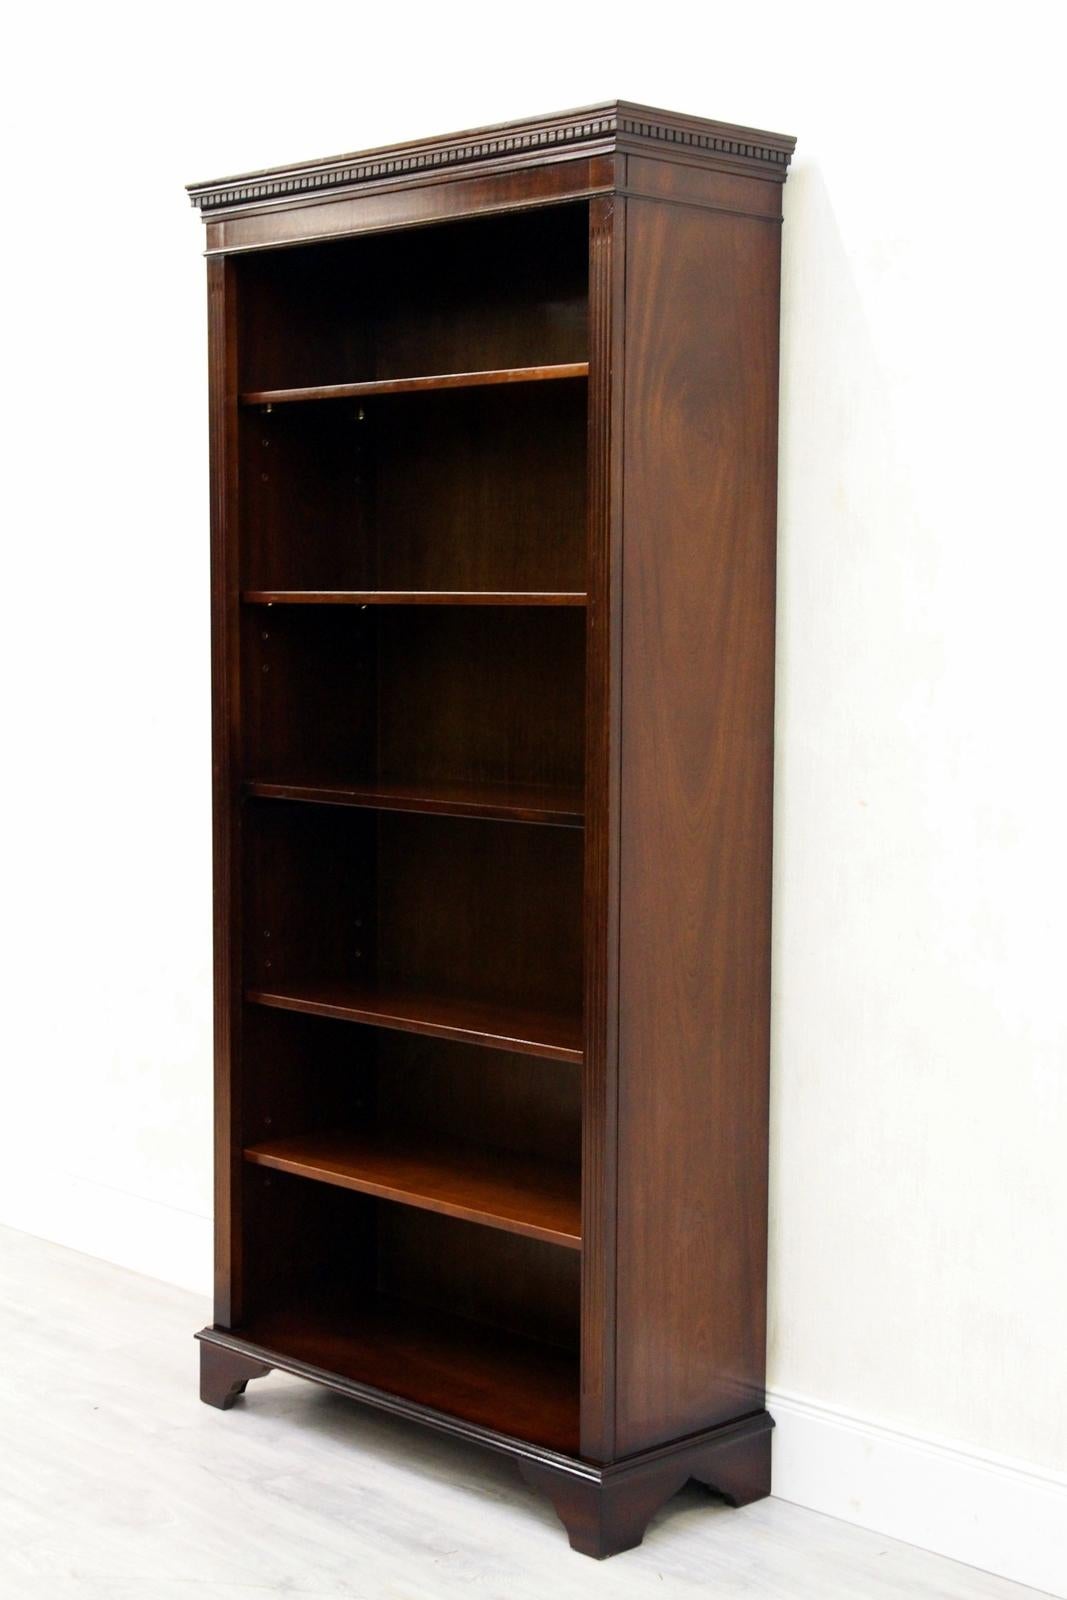 English bookcase/cabinet from 1980-1990
Condition: The bookcase is in good condition and still has the charm of the 